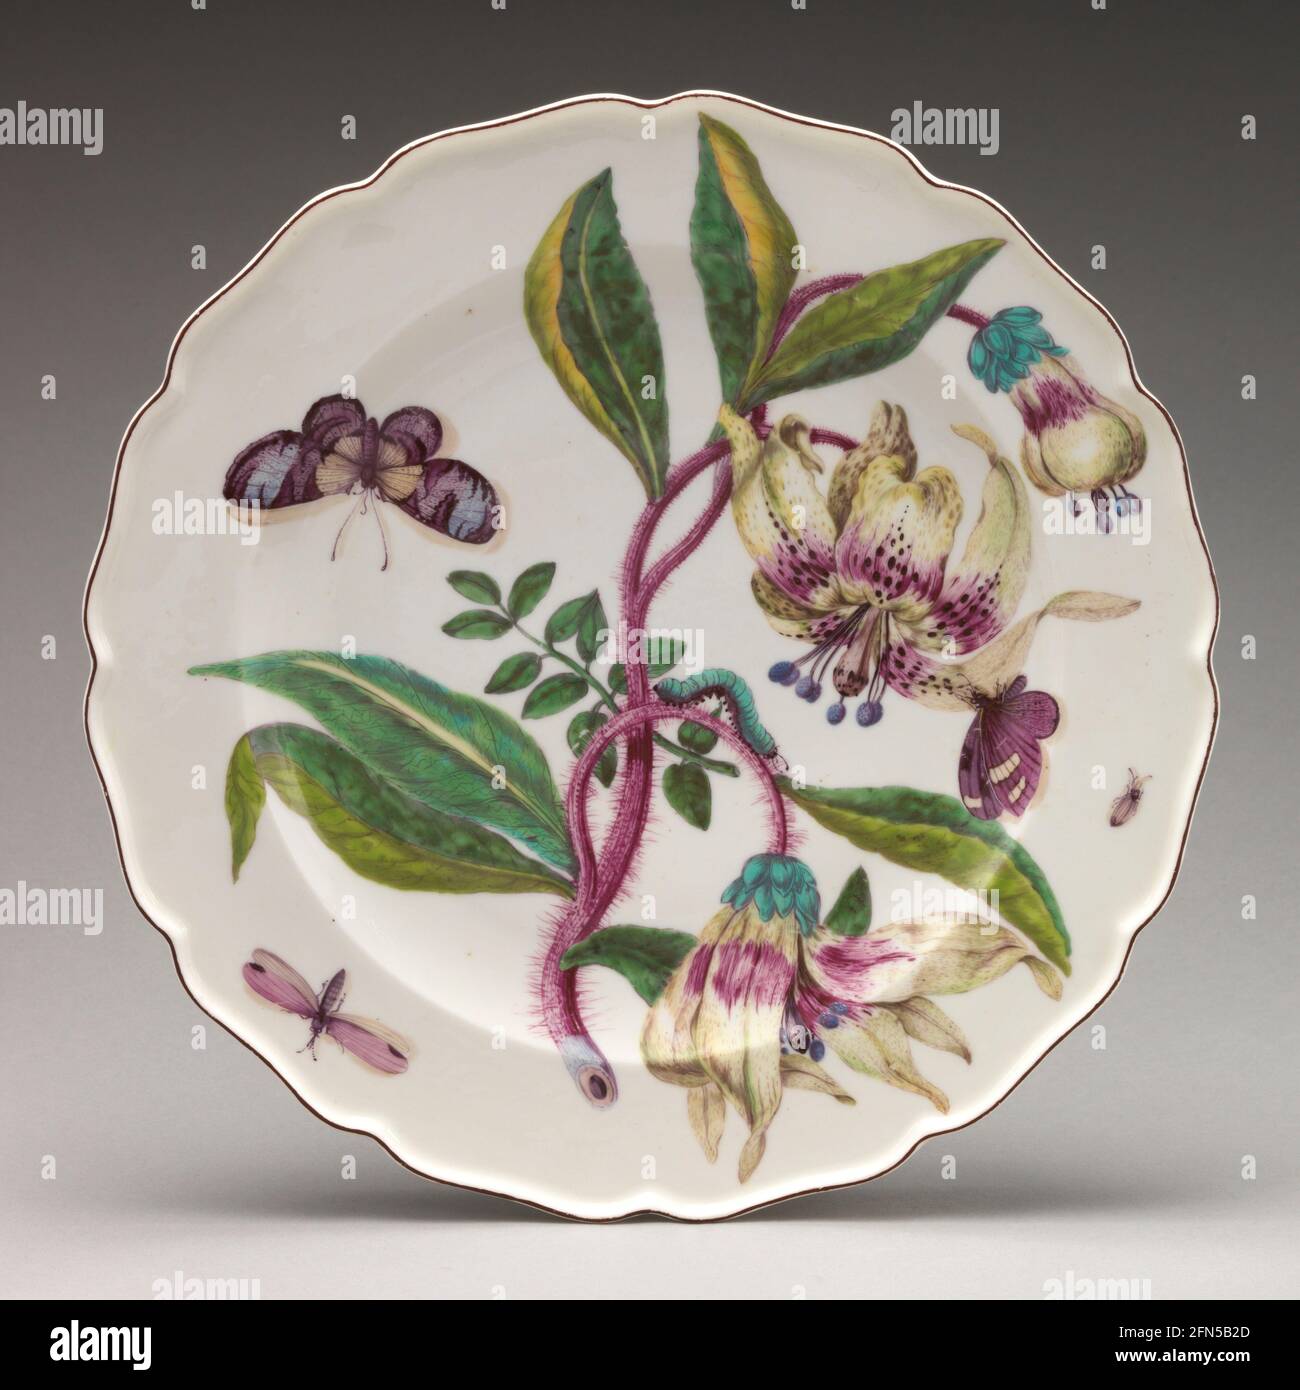 Botanical dish with spray of lilies ca. 1755 Chelsea Porcelain Manufactory Stock Photo